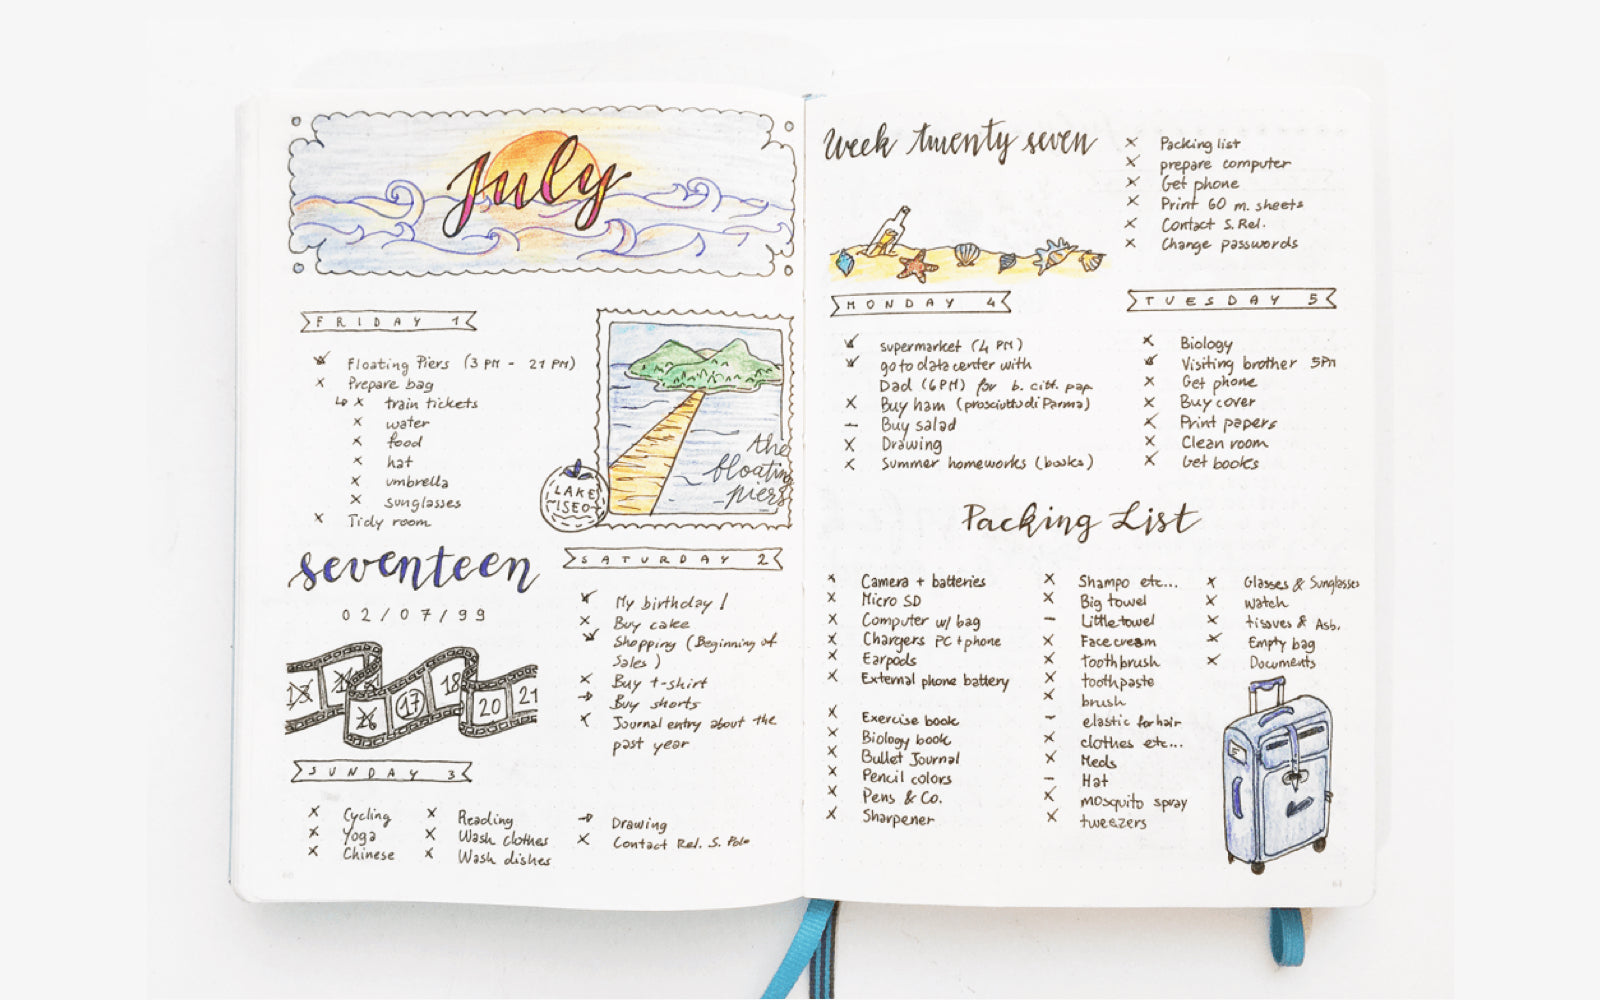 BuJo Show and Tell With @abulletandsomelines - Bullet Journal